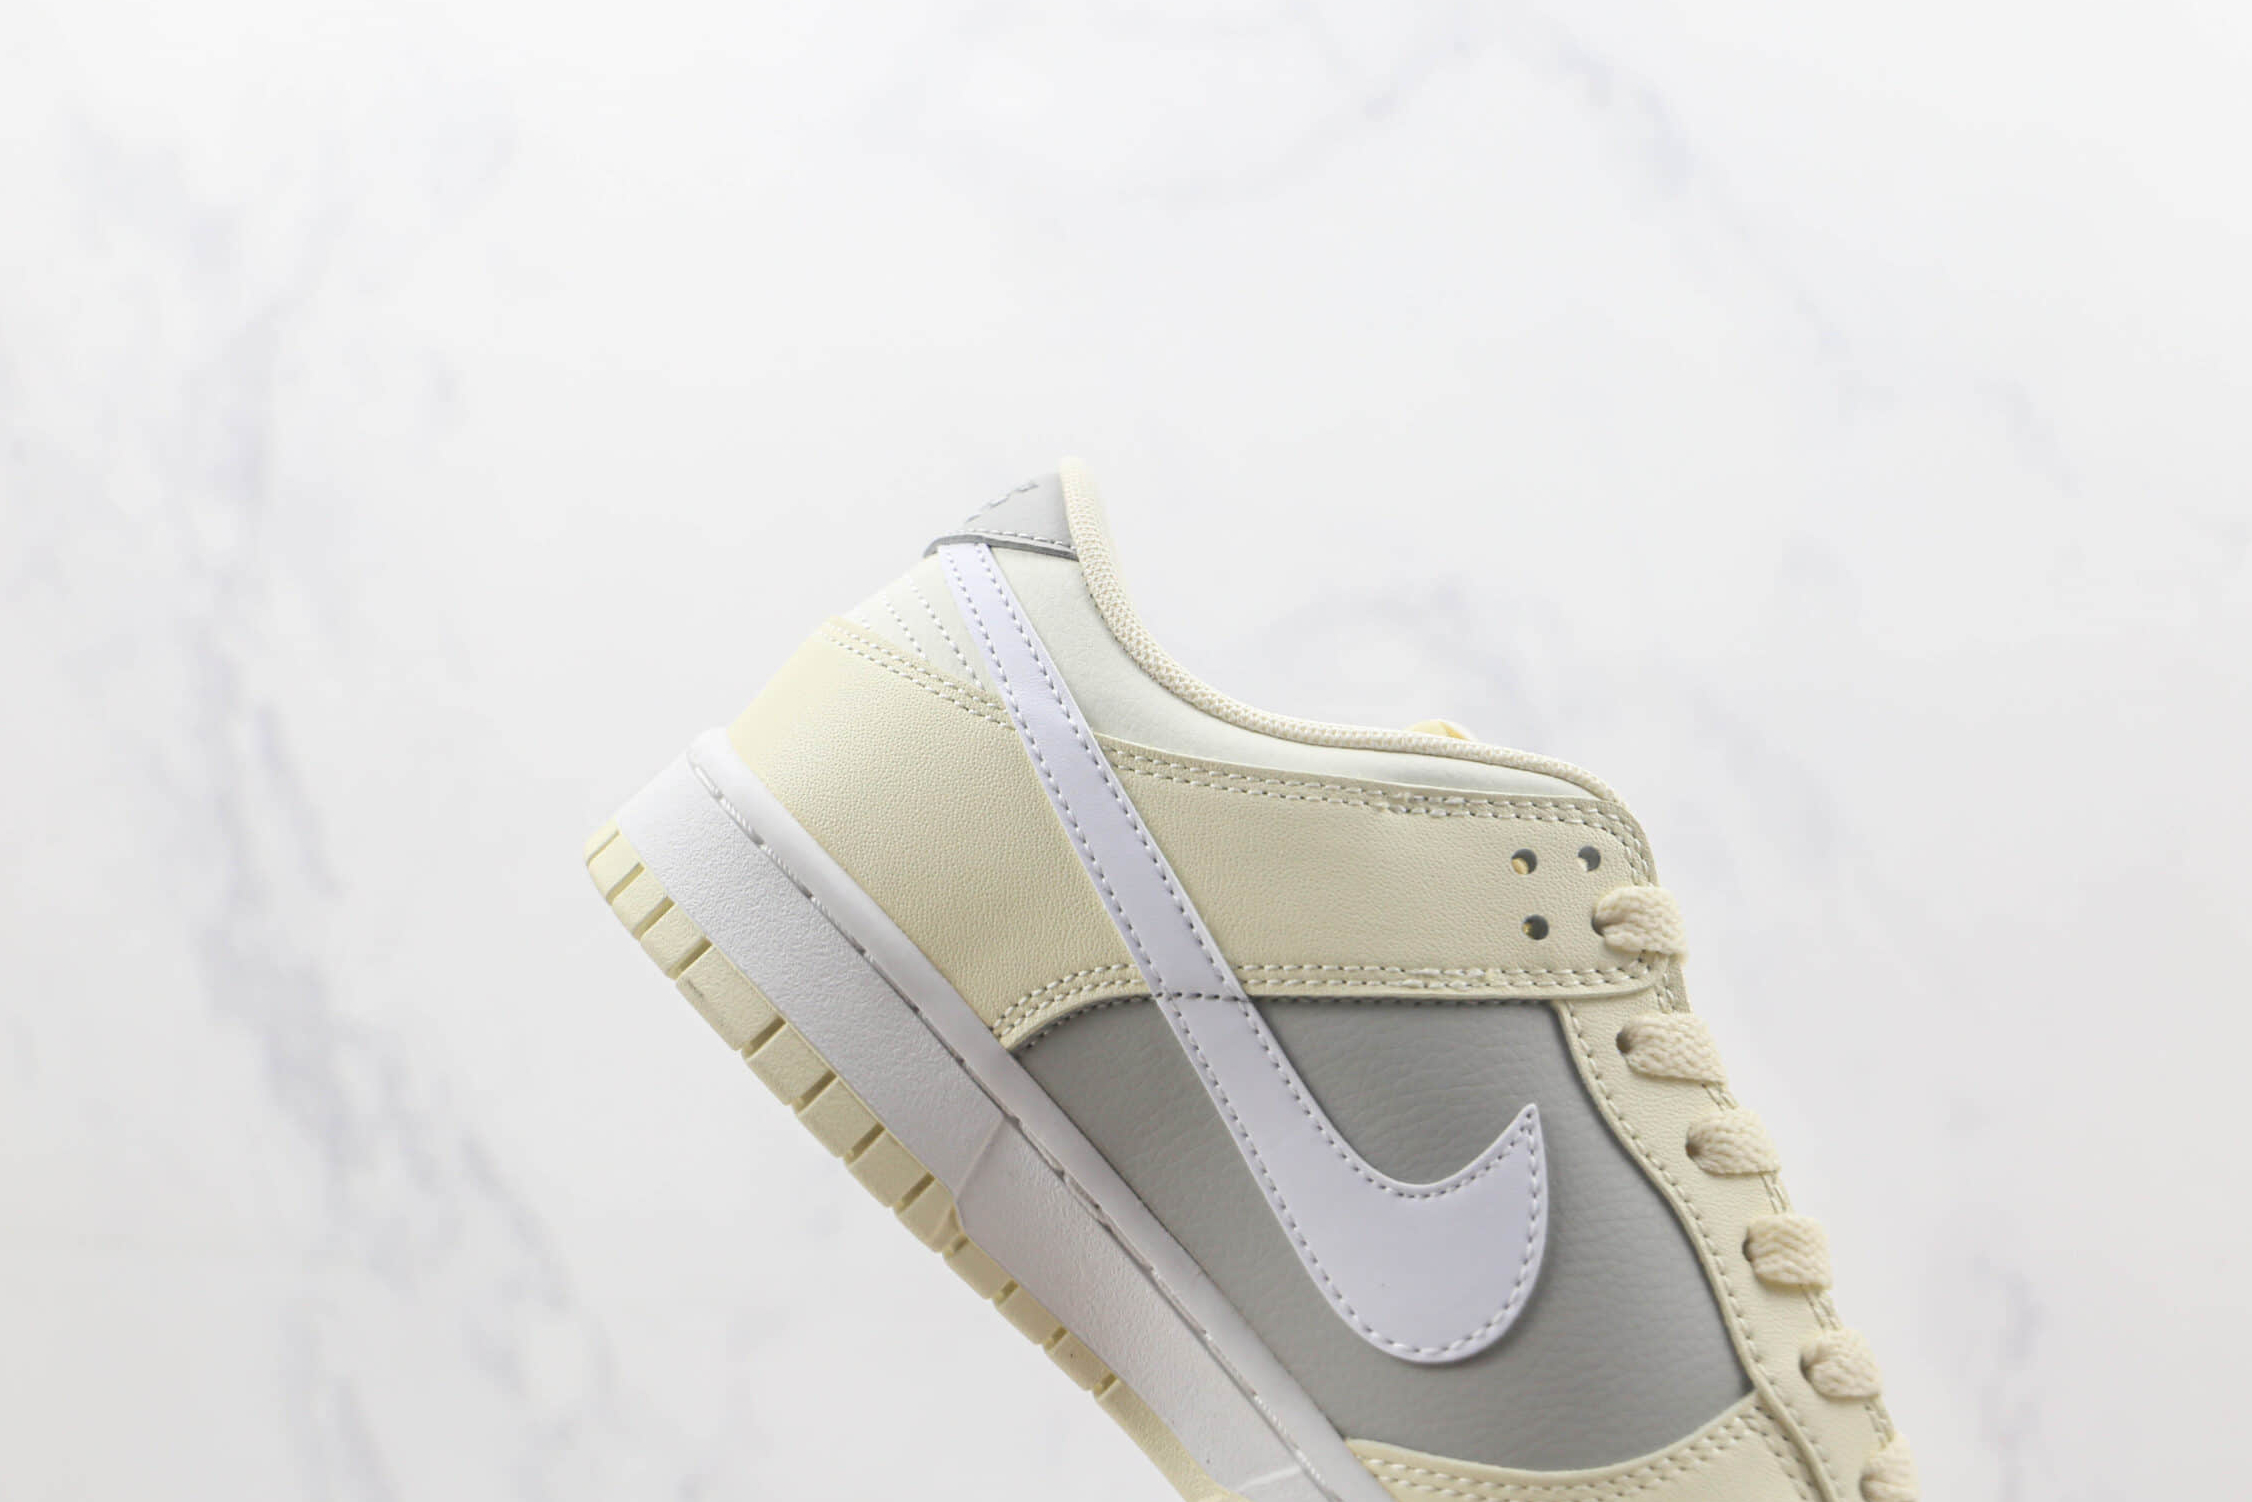 Nike SB Dunk Low Cream White Light Grey DD8052-112 - Stylish and Versatile Sneakers for Every Occasion